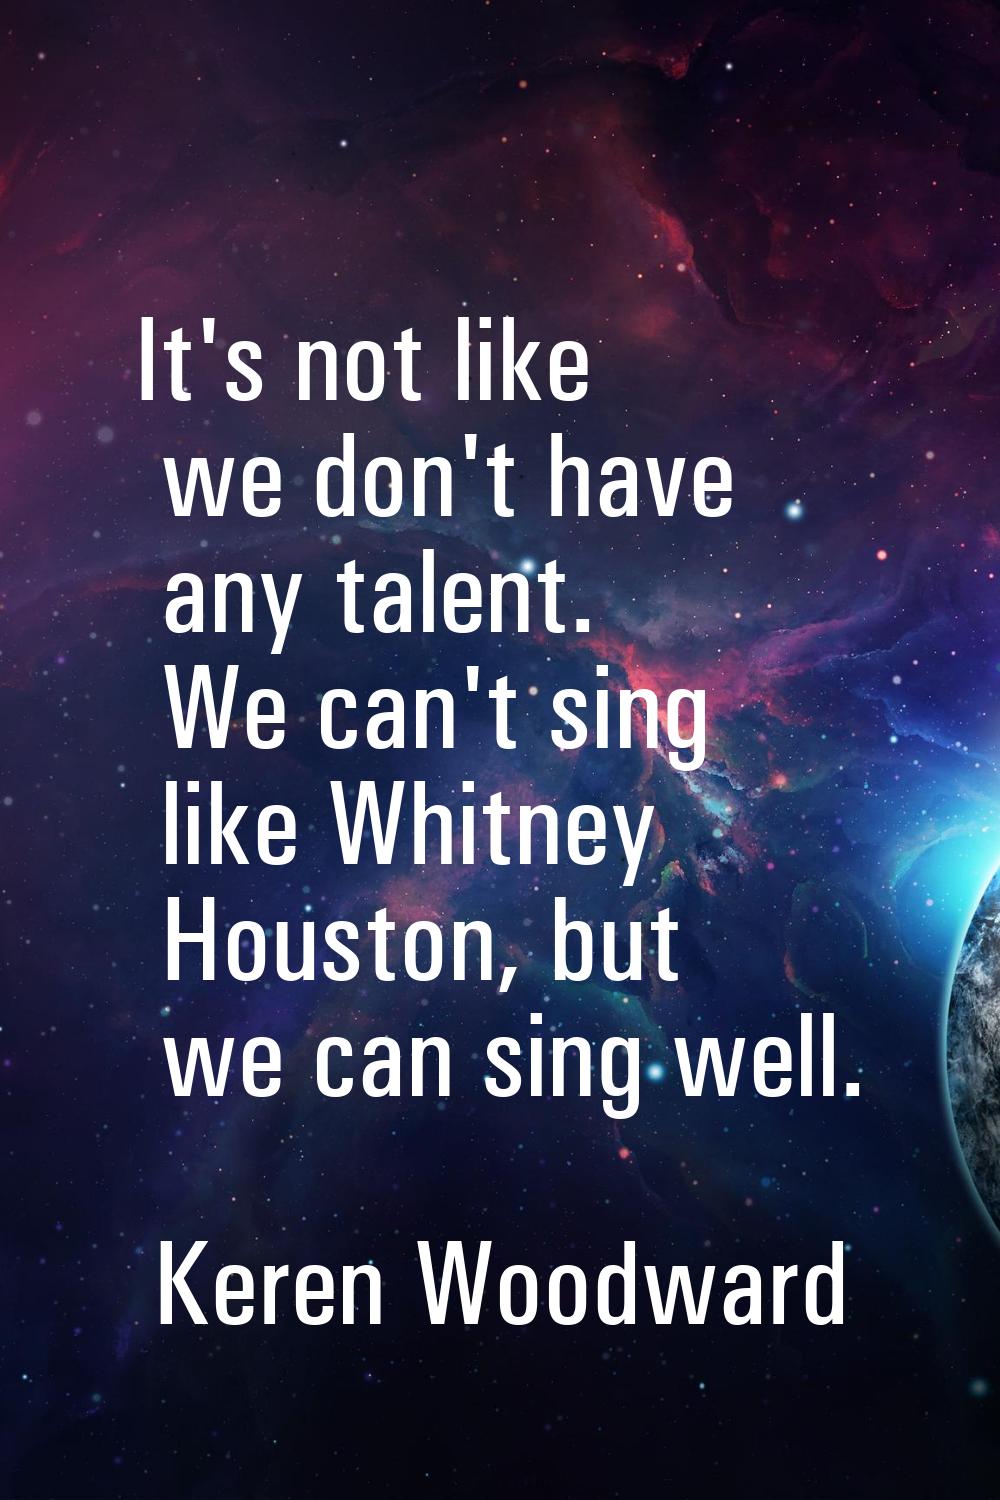 It's not like we don't have any talent. We can't sing like Whitney Houston, but we can sing well.